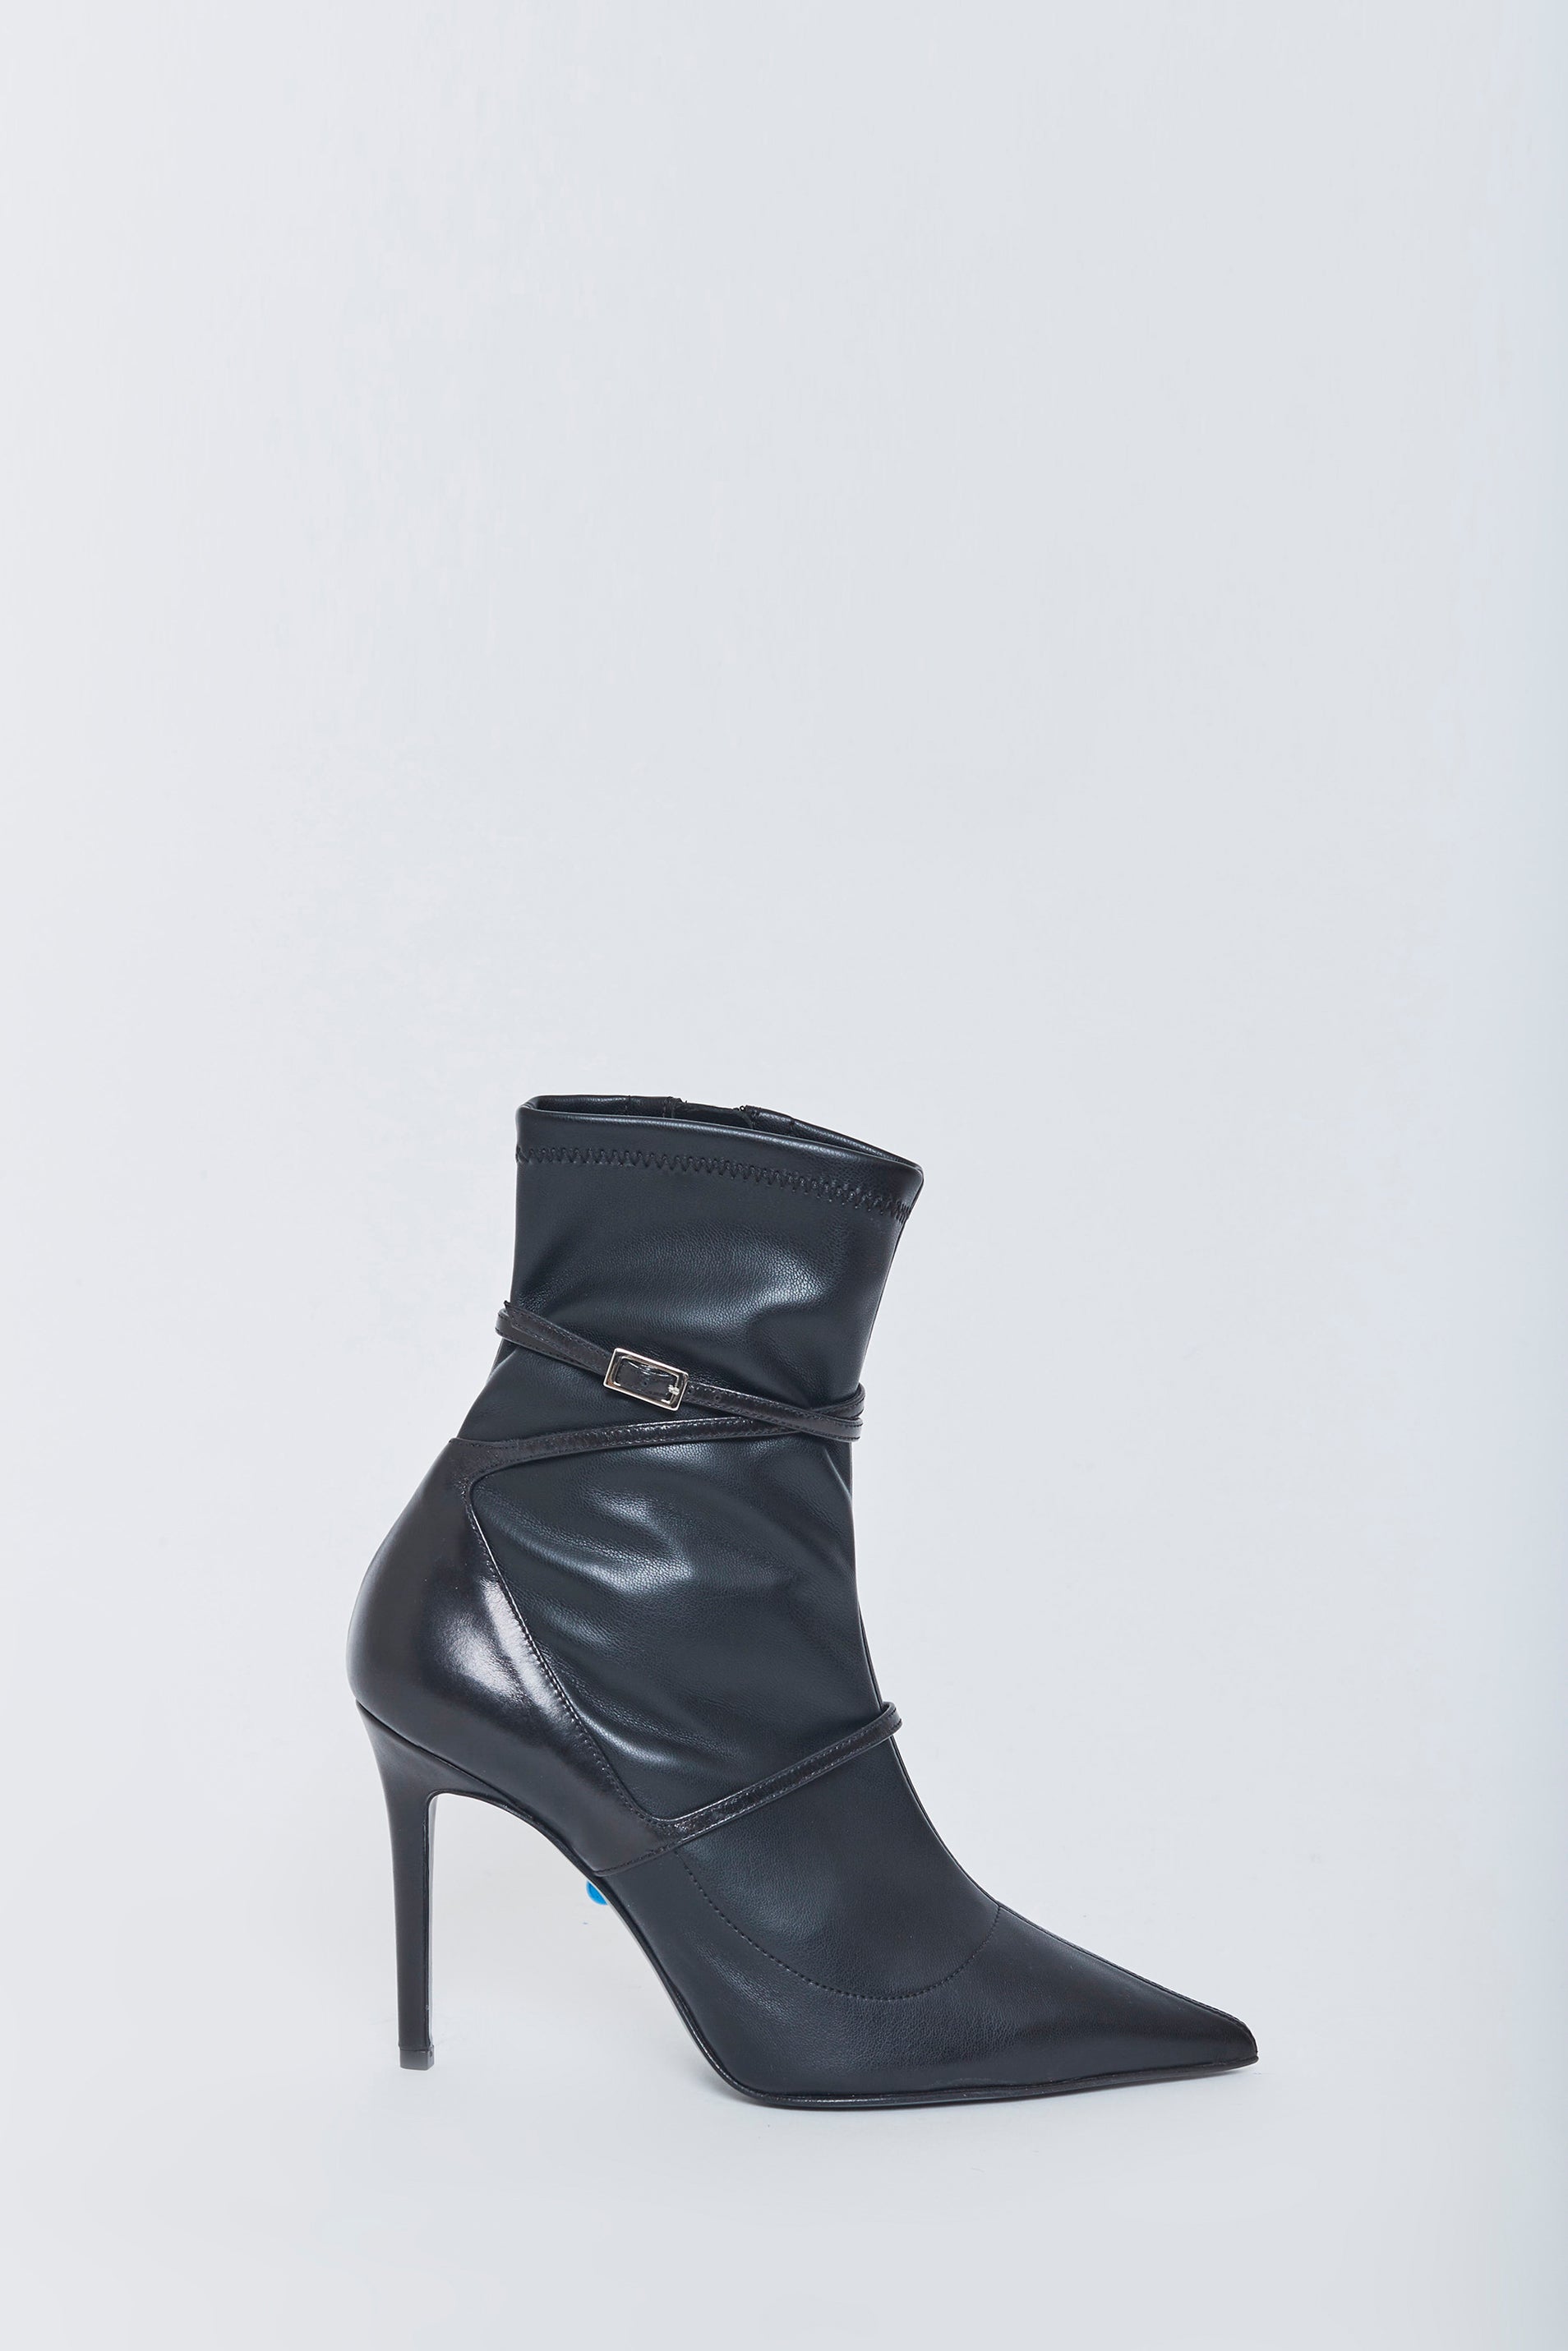 K95 STRETCH ANKLE BOOTS BLACK